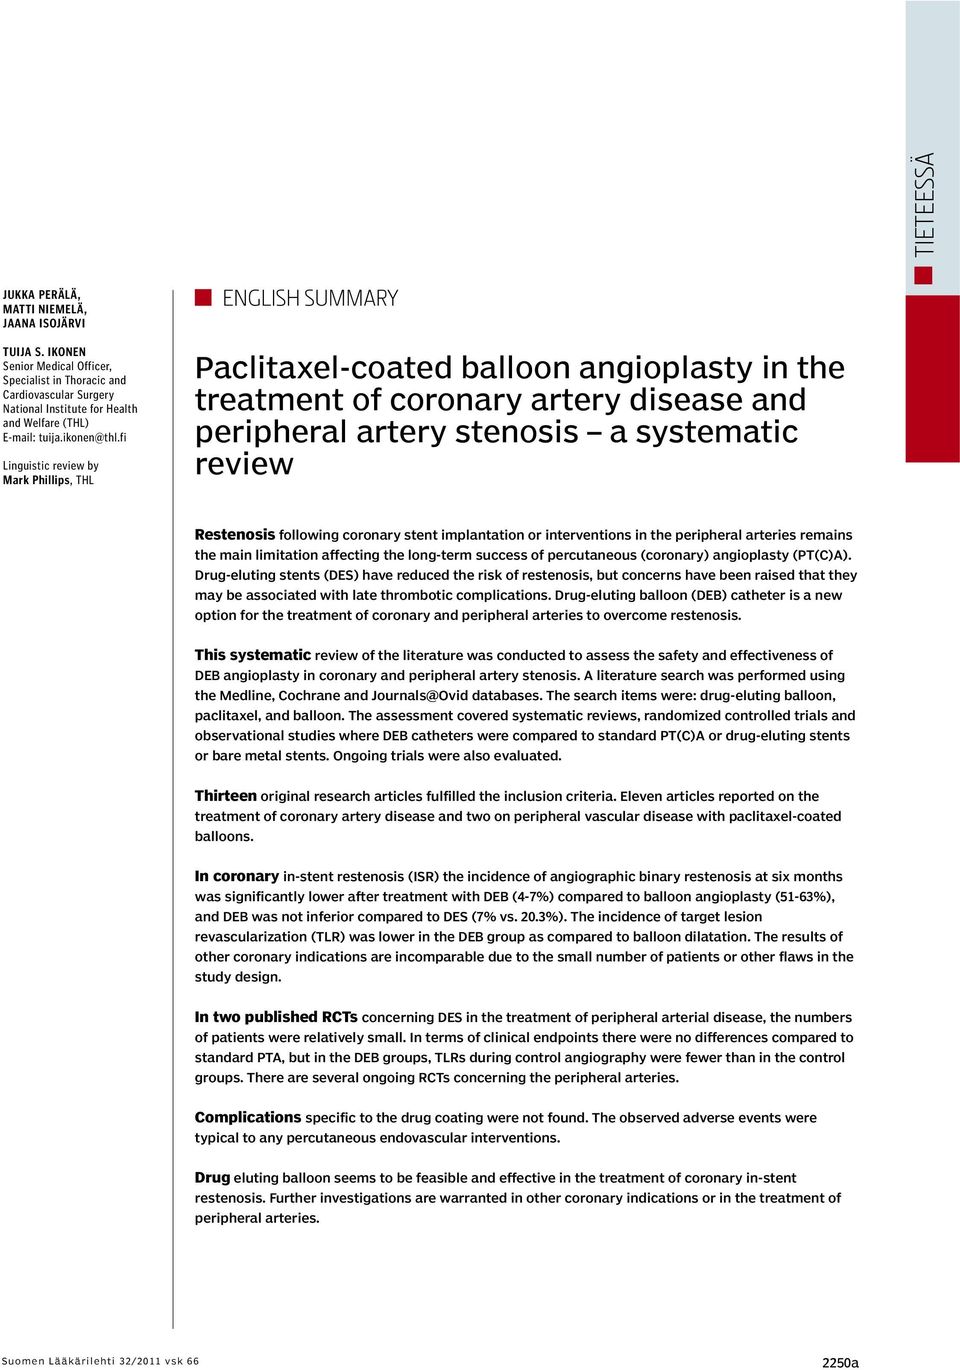 fi Linguistic review by Mark Phillips, THL ENGLISH SUMMARY Paclitaxel-coated balloon angioplasty in the treatment of coronary artery disease and peripheral artery stenosis a systematic review